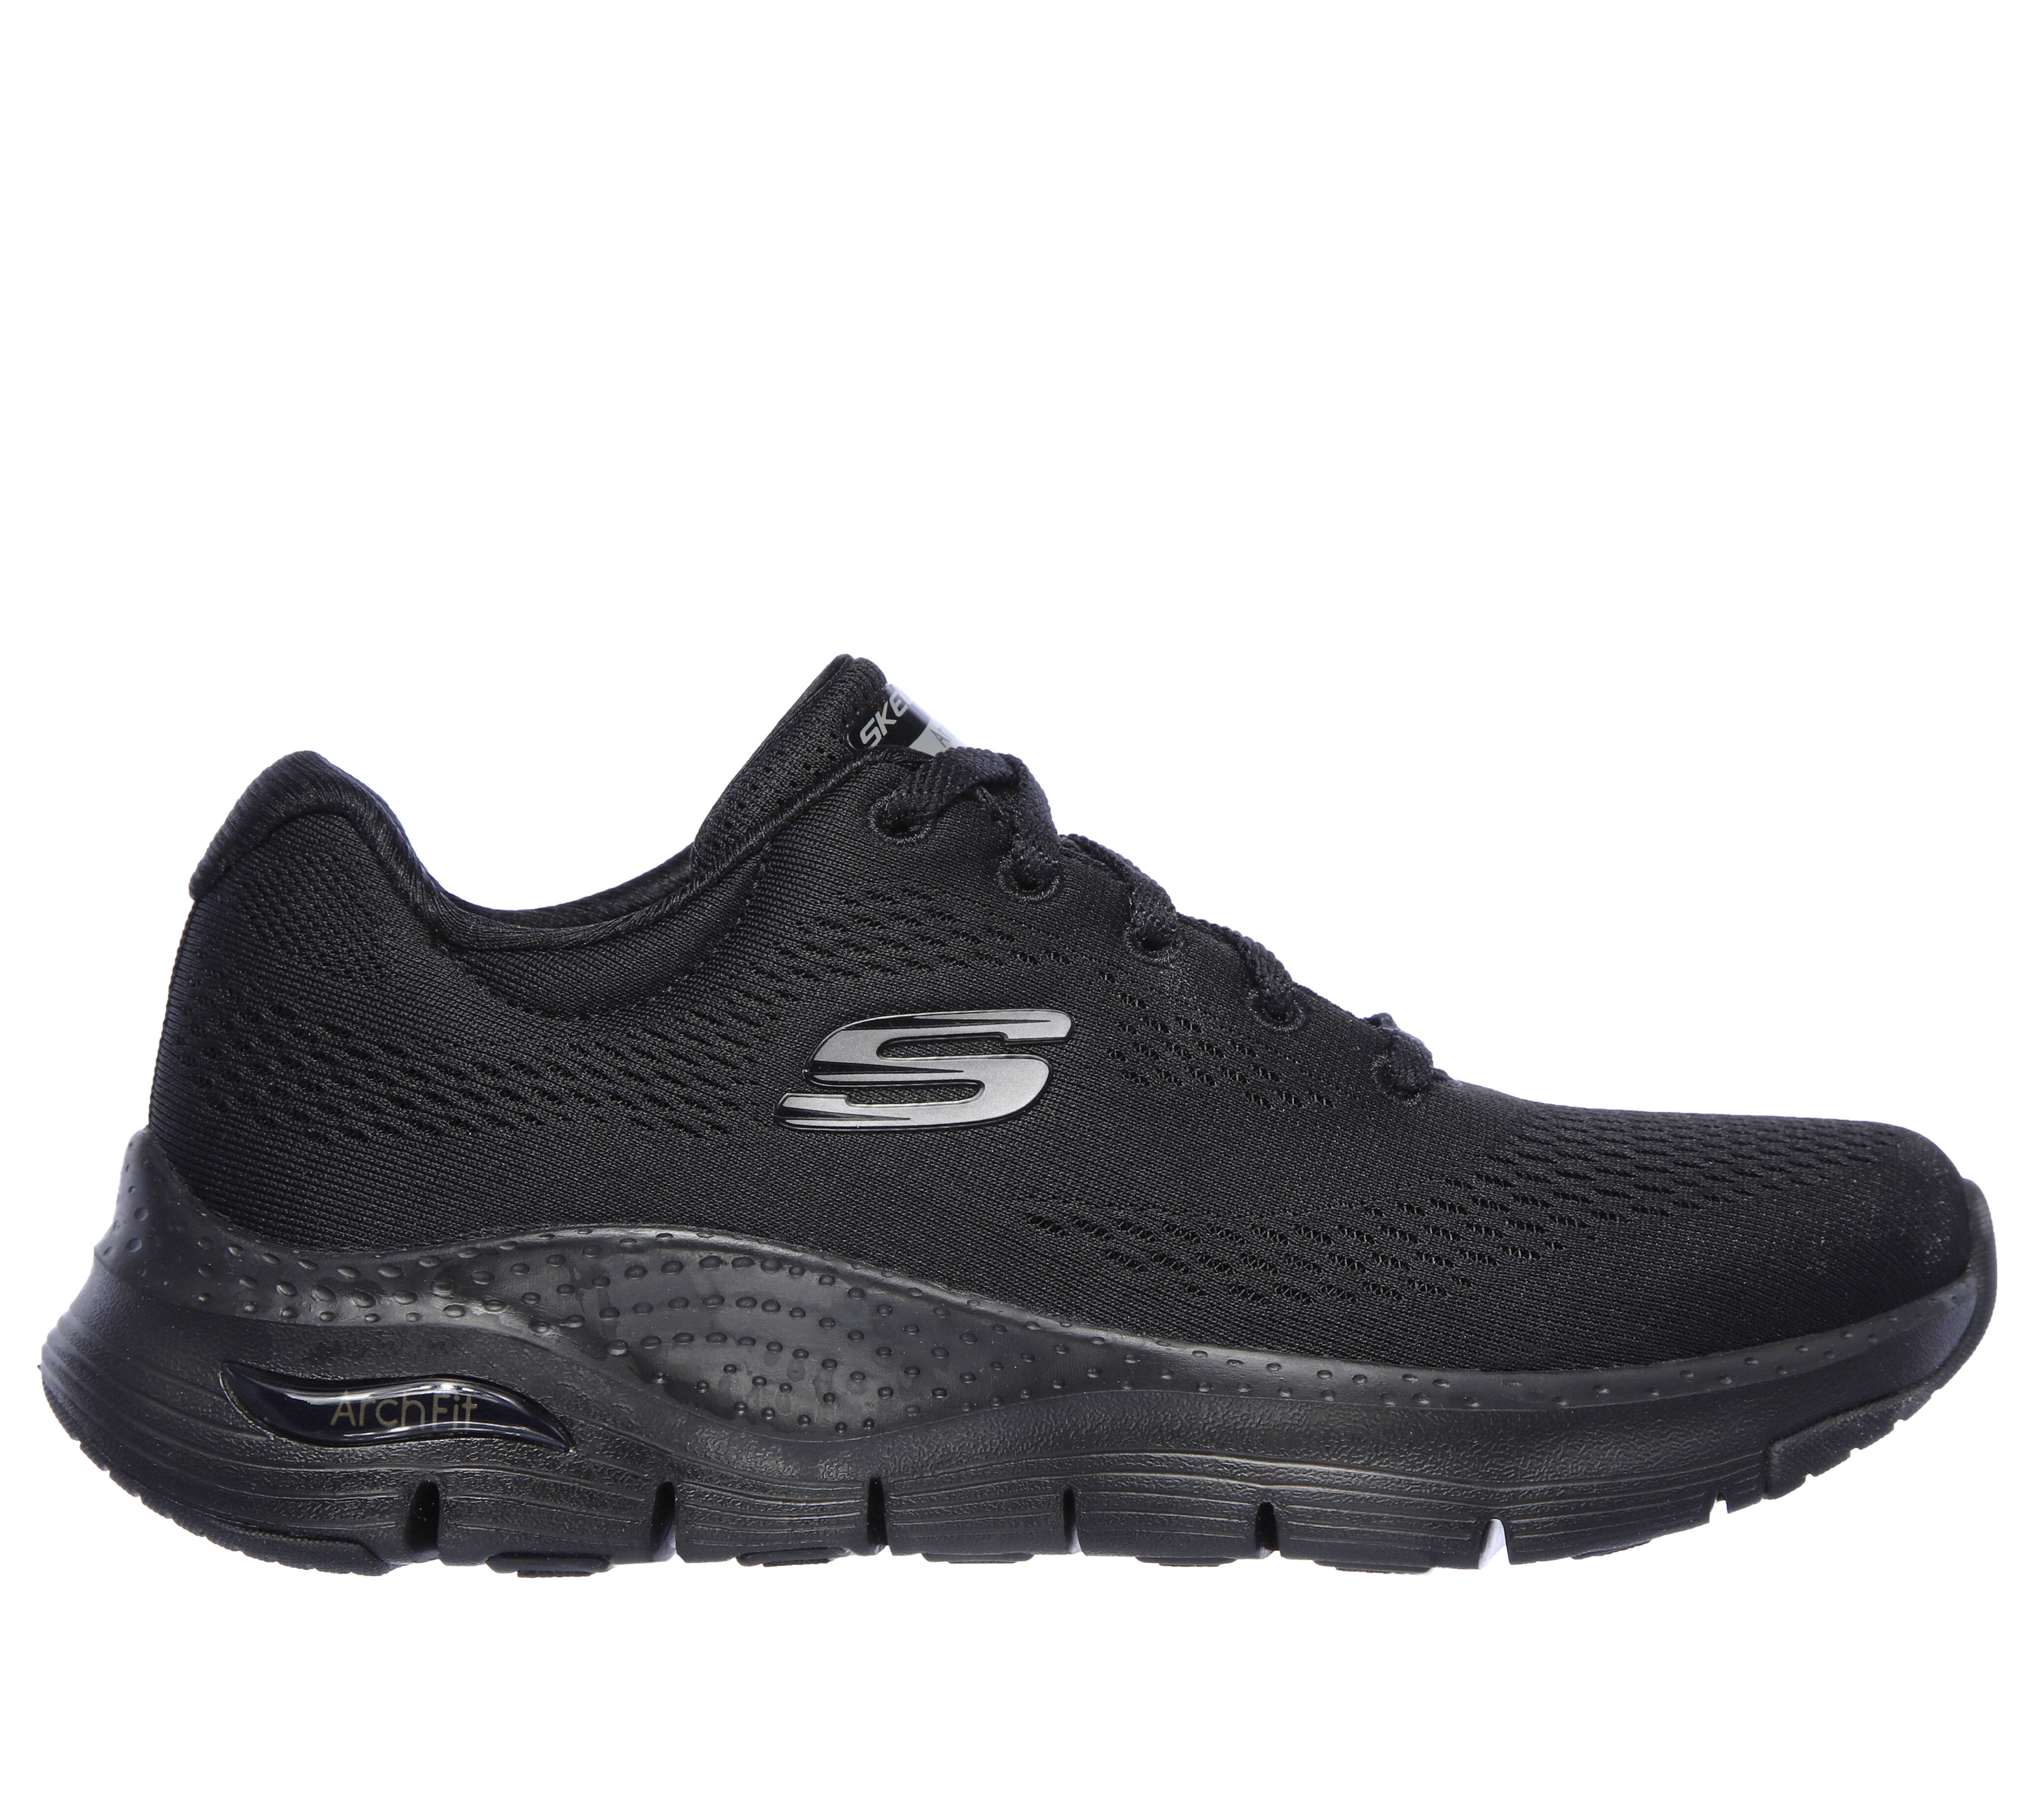 who sells sketcher shoes